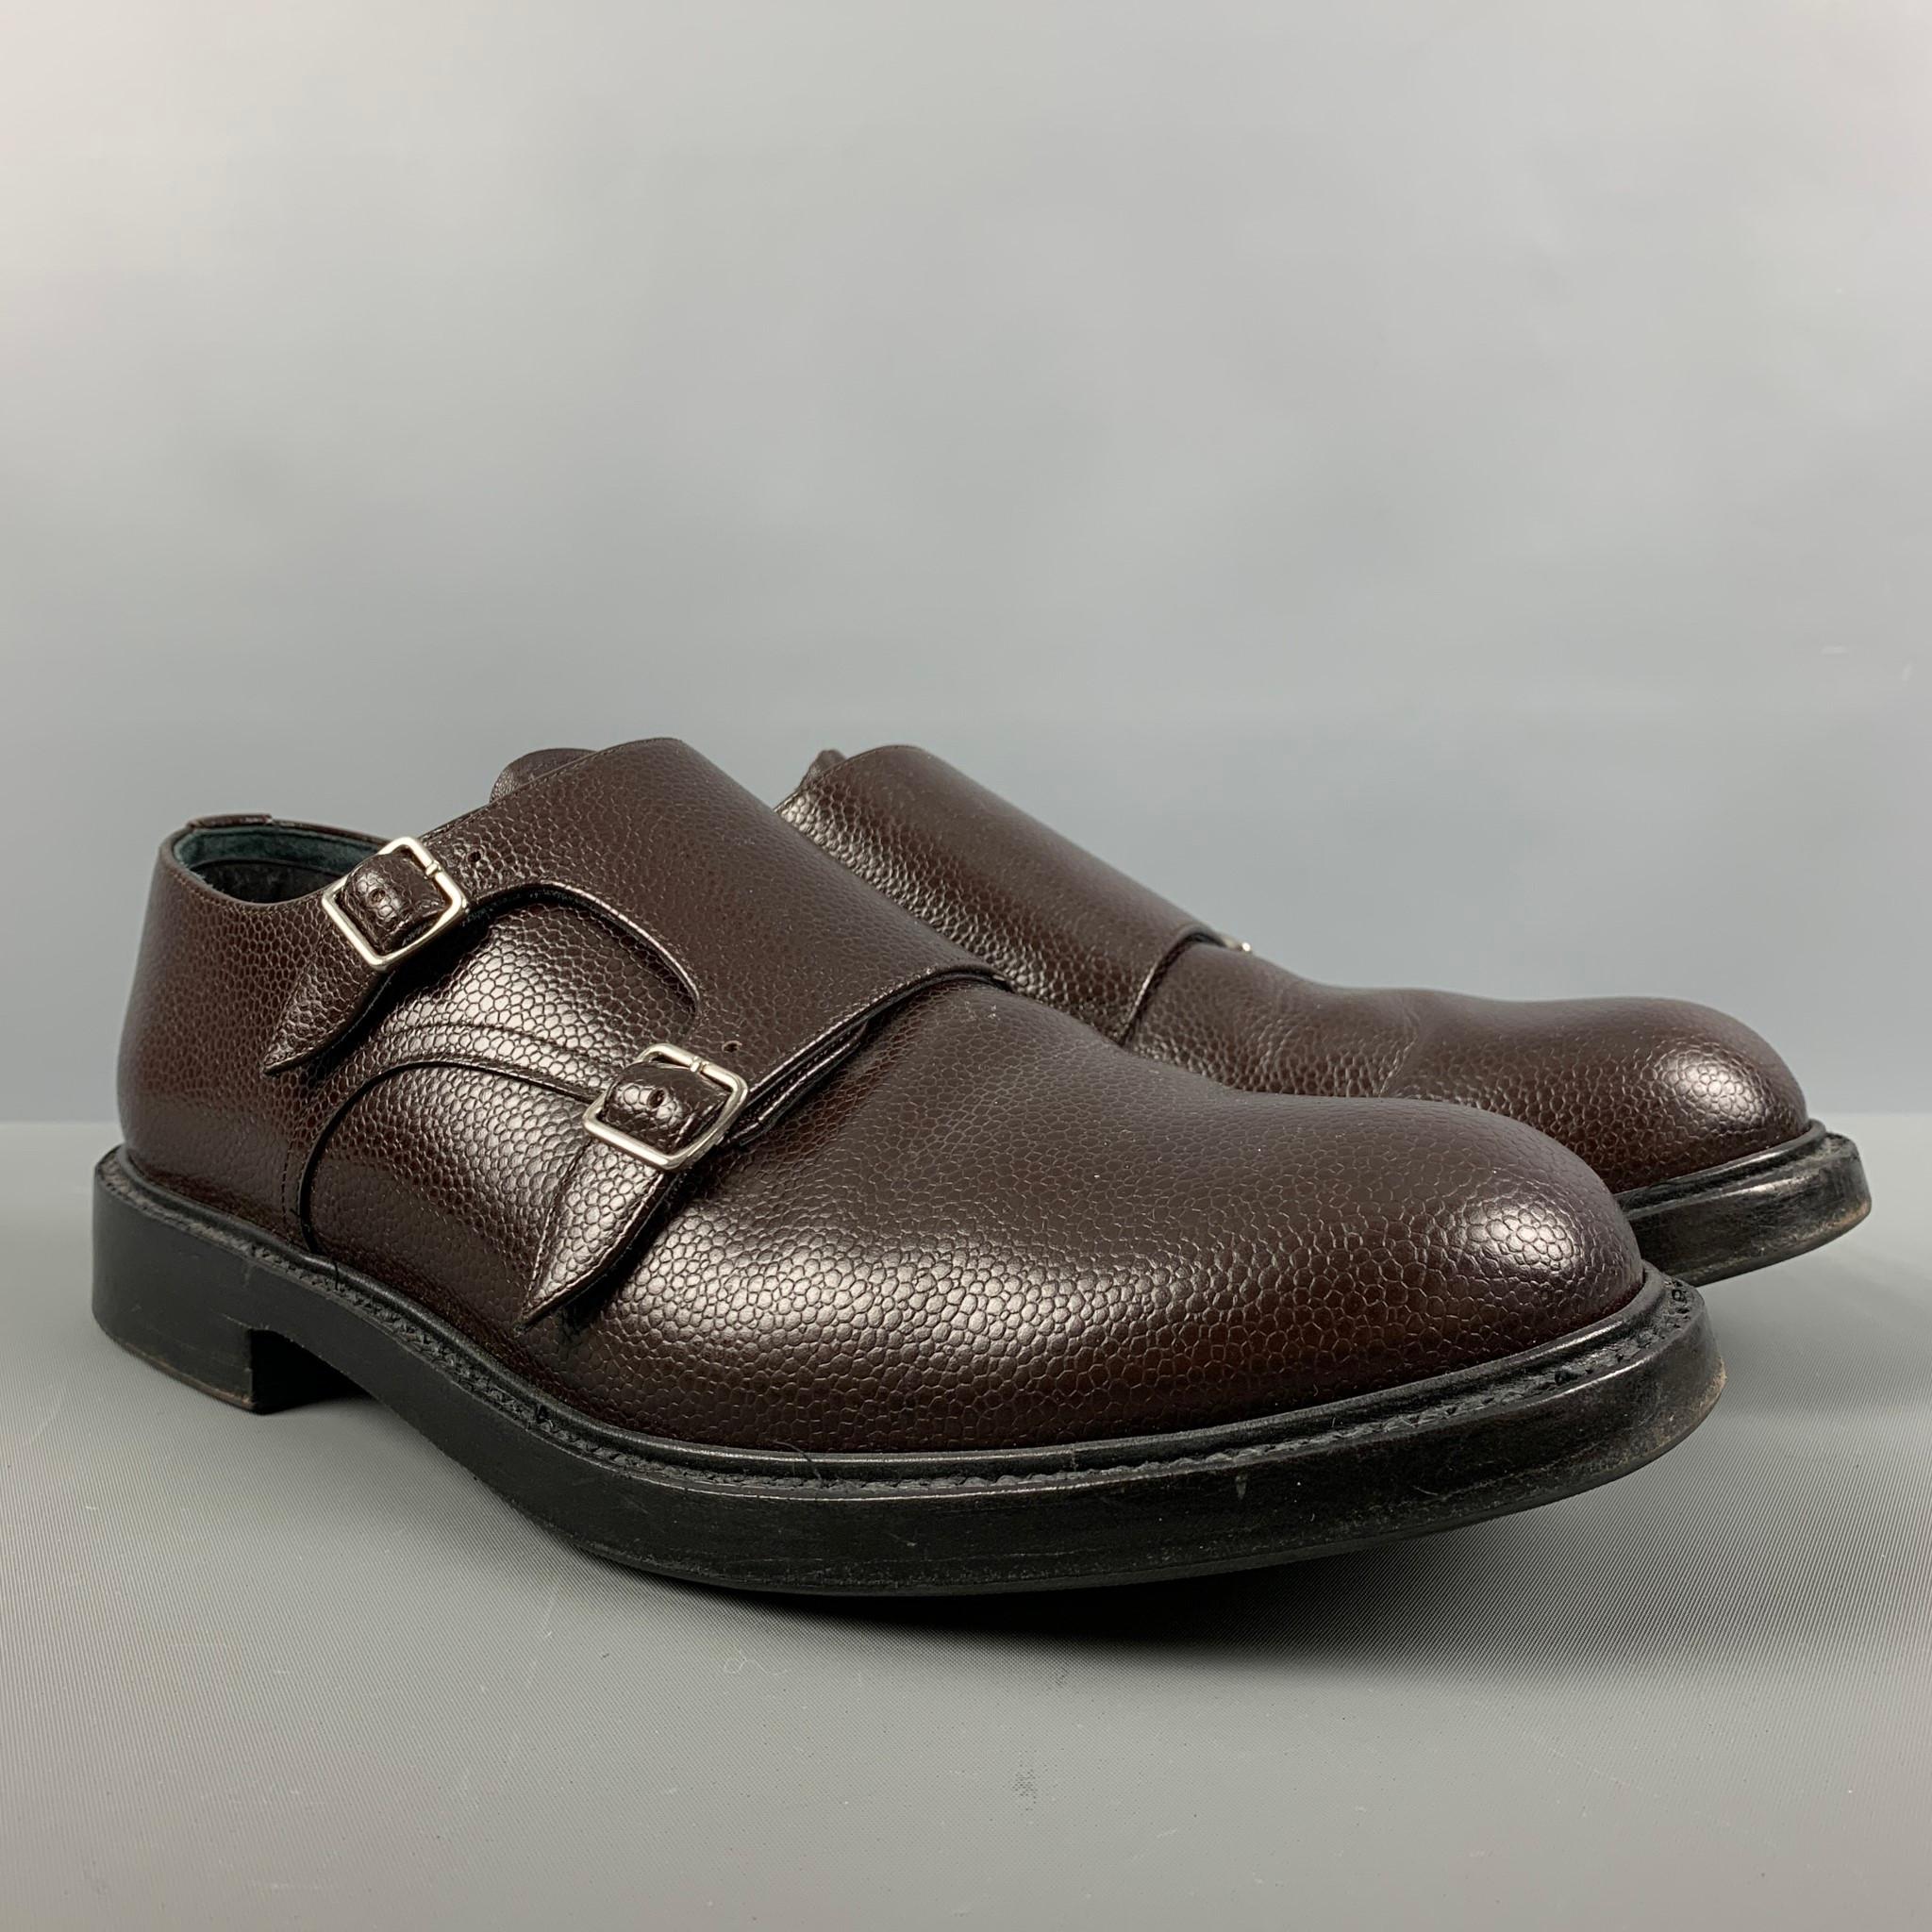 CALVIN KLEIN 205W39NYC loafers comes in a brown leather featuring a round toe, reptile texture, and a double monk strap. Made in Italy.

Excellent Pre-Owned Condition.
Marked: 43

Outsole: 12.75 in. x 4.5 in 

SKU: 124598
Category: Loafers

More